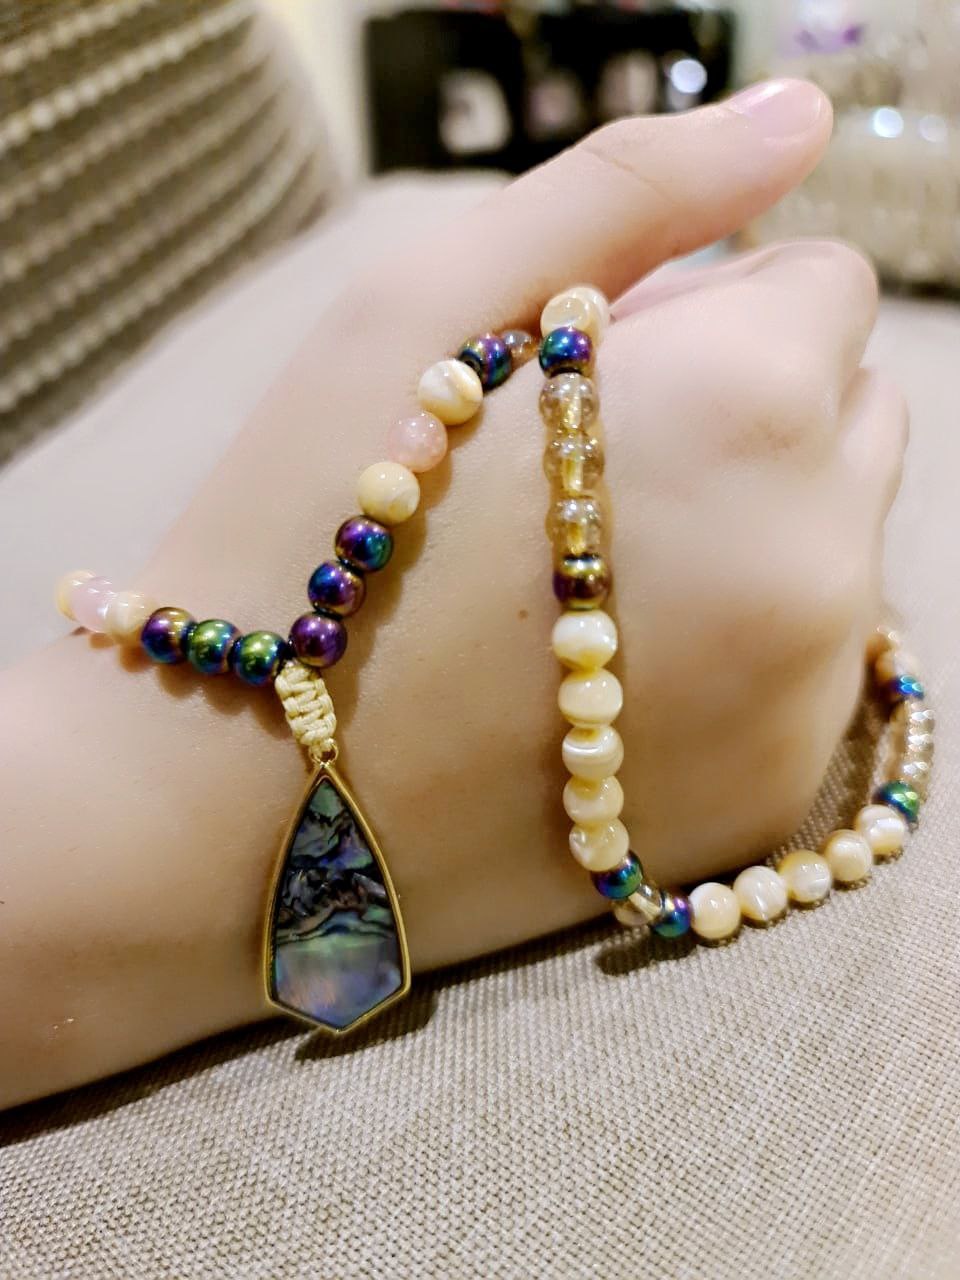 Abalone pendant, with natural trochus shell, sunstone and hematite beads. The spacers are stunning abalone shell beads and match the pendant perfectly.  Packaged in a luxurious pouch and a gift box.  99 beads